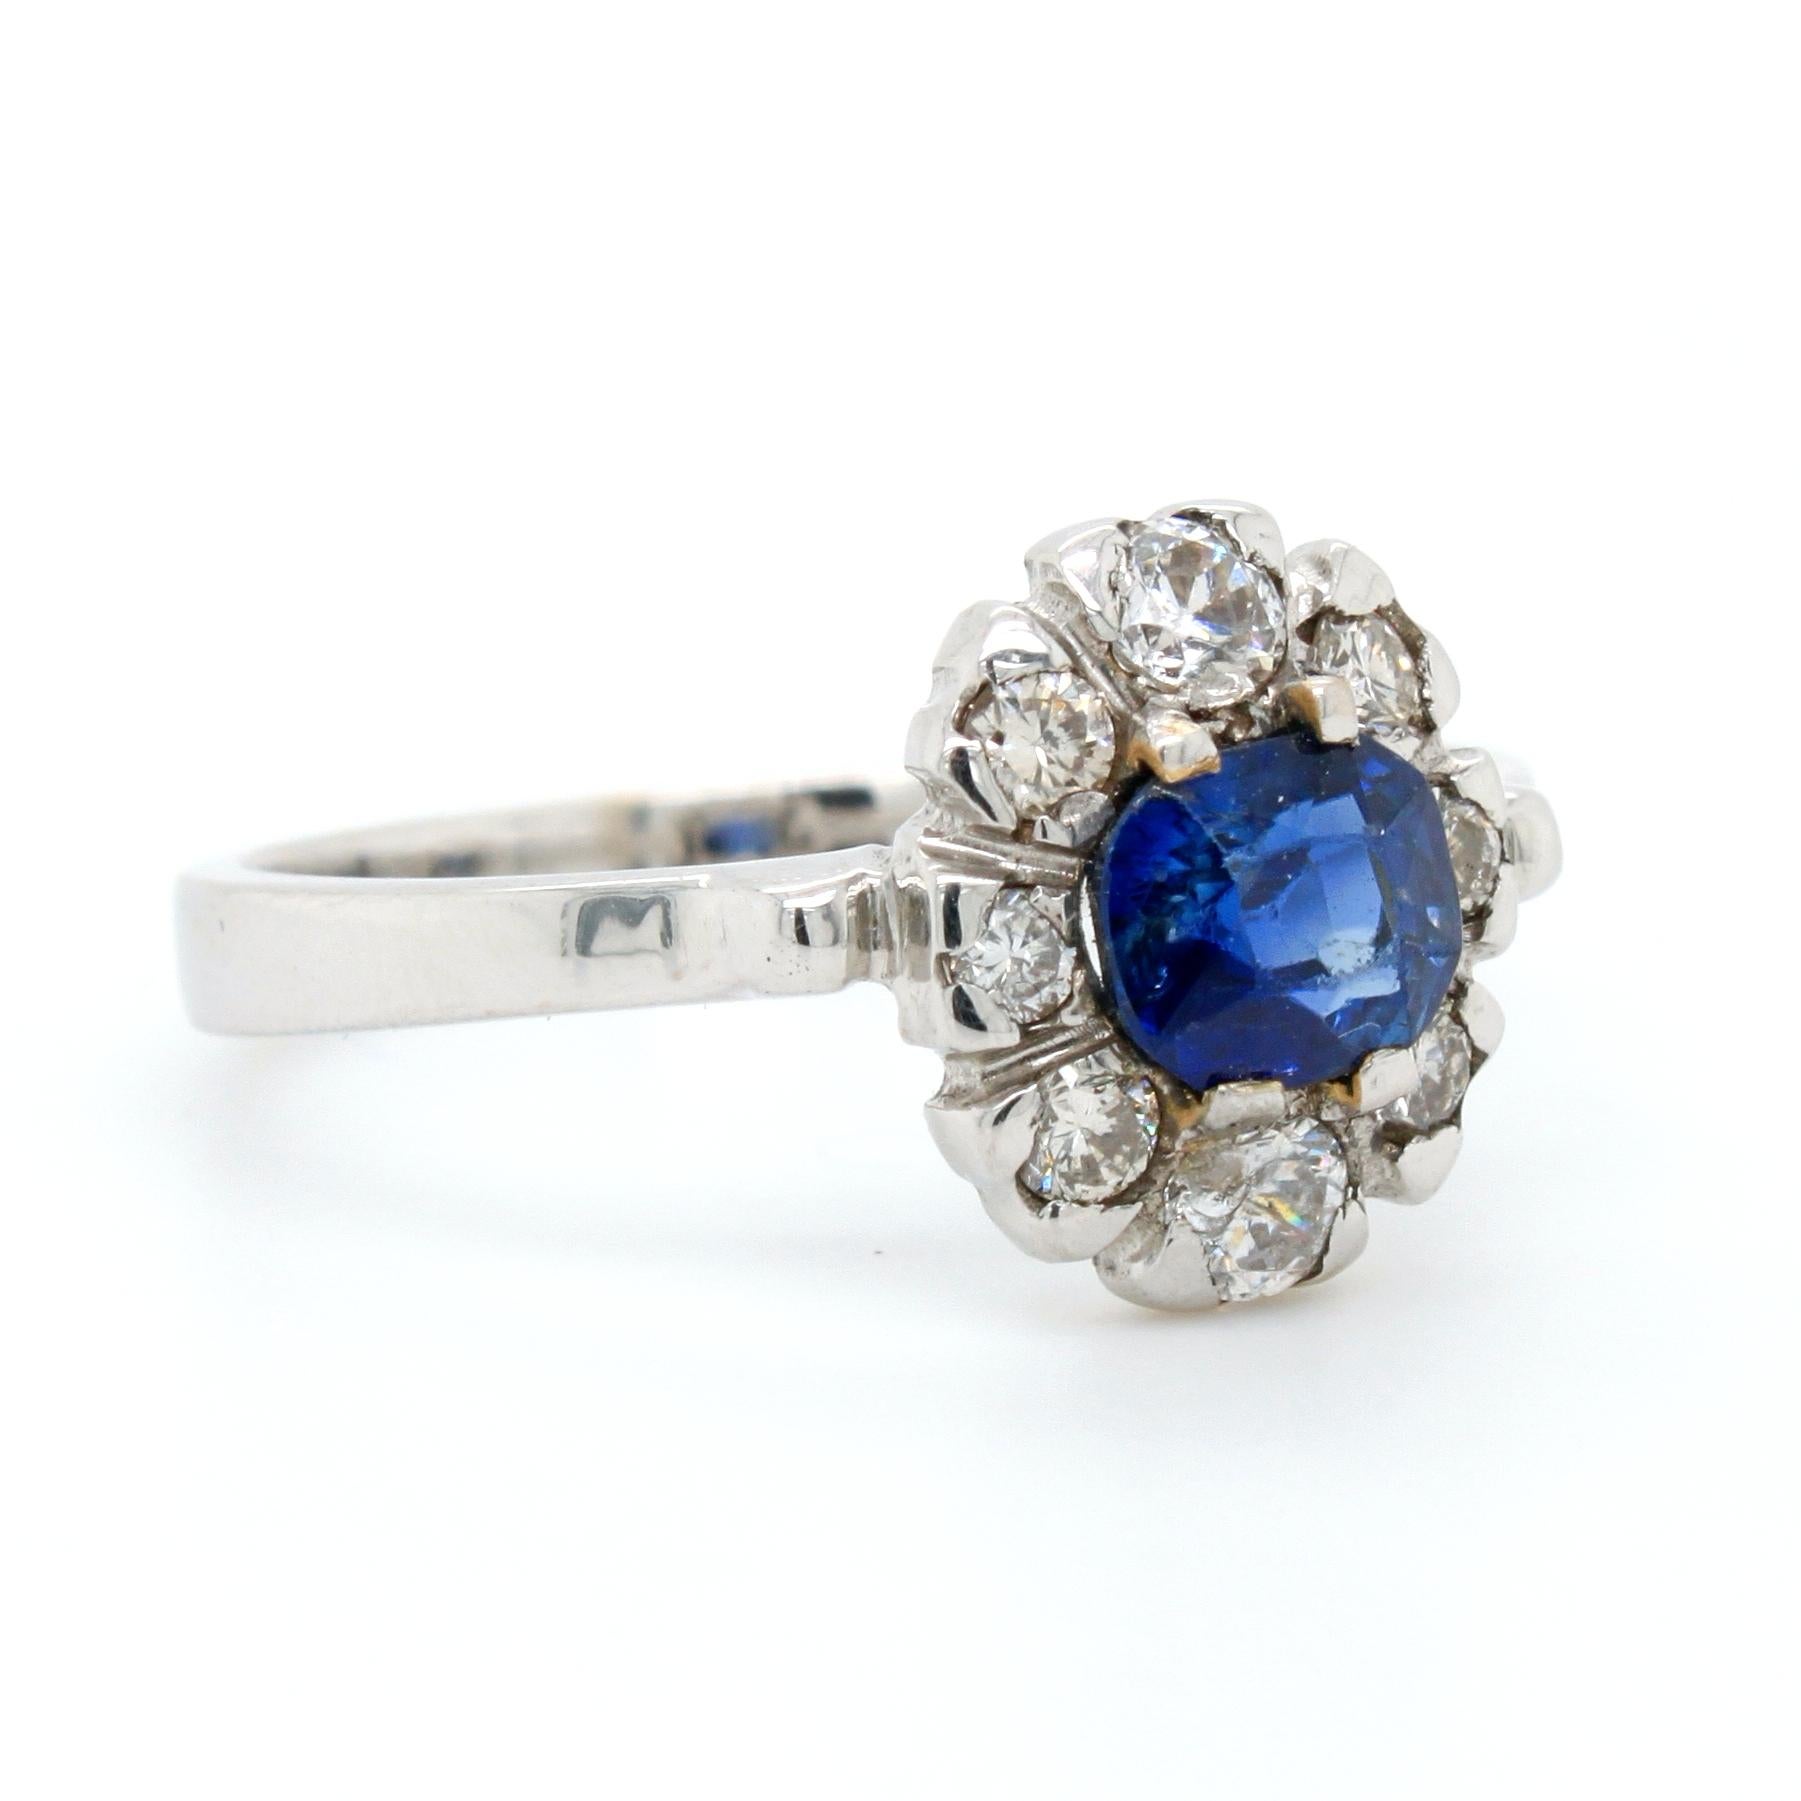 A sapphire and diamond ring in white gold. The cushion sapphire weighs 0.84 carats, is natural, not heated, and of Kashmir origin - accompanied by an IGI certificate. It has strong blue colour and no eye visible inclusions, with some colour zoning